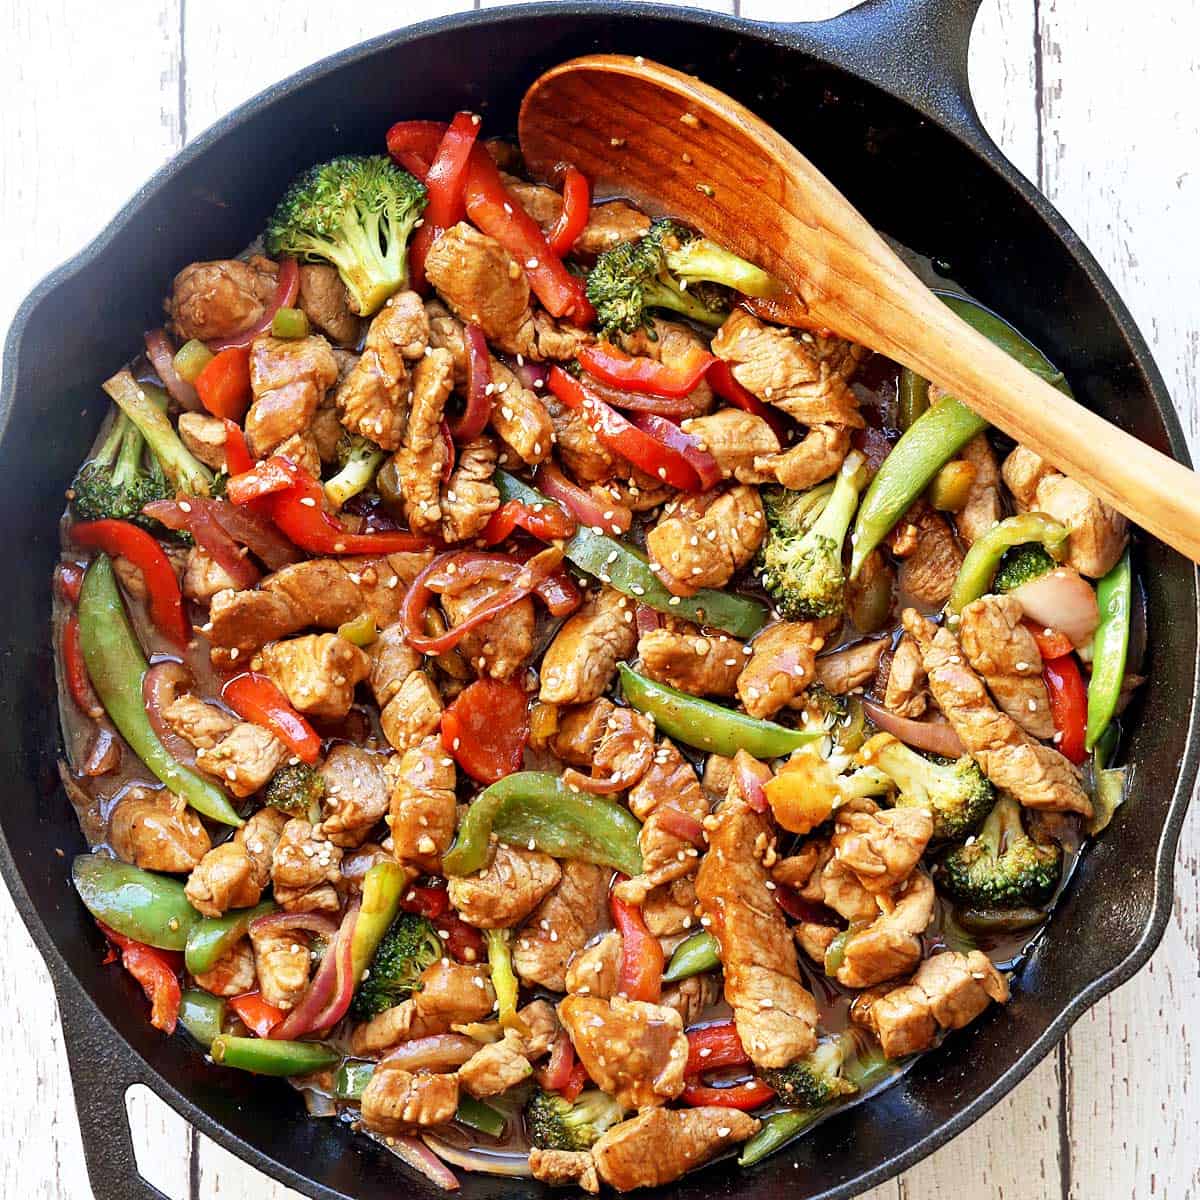 Meal of the month: Stir-fry supper - Harvard Health